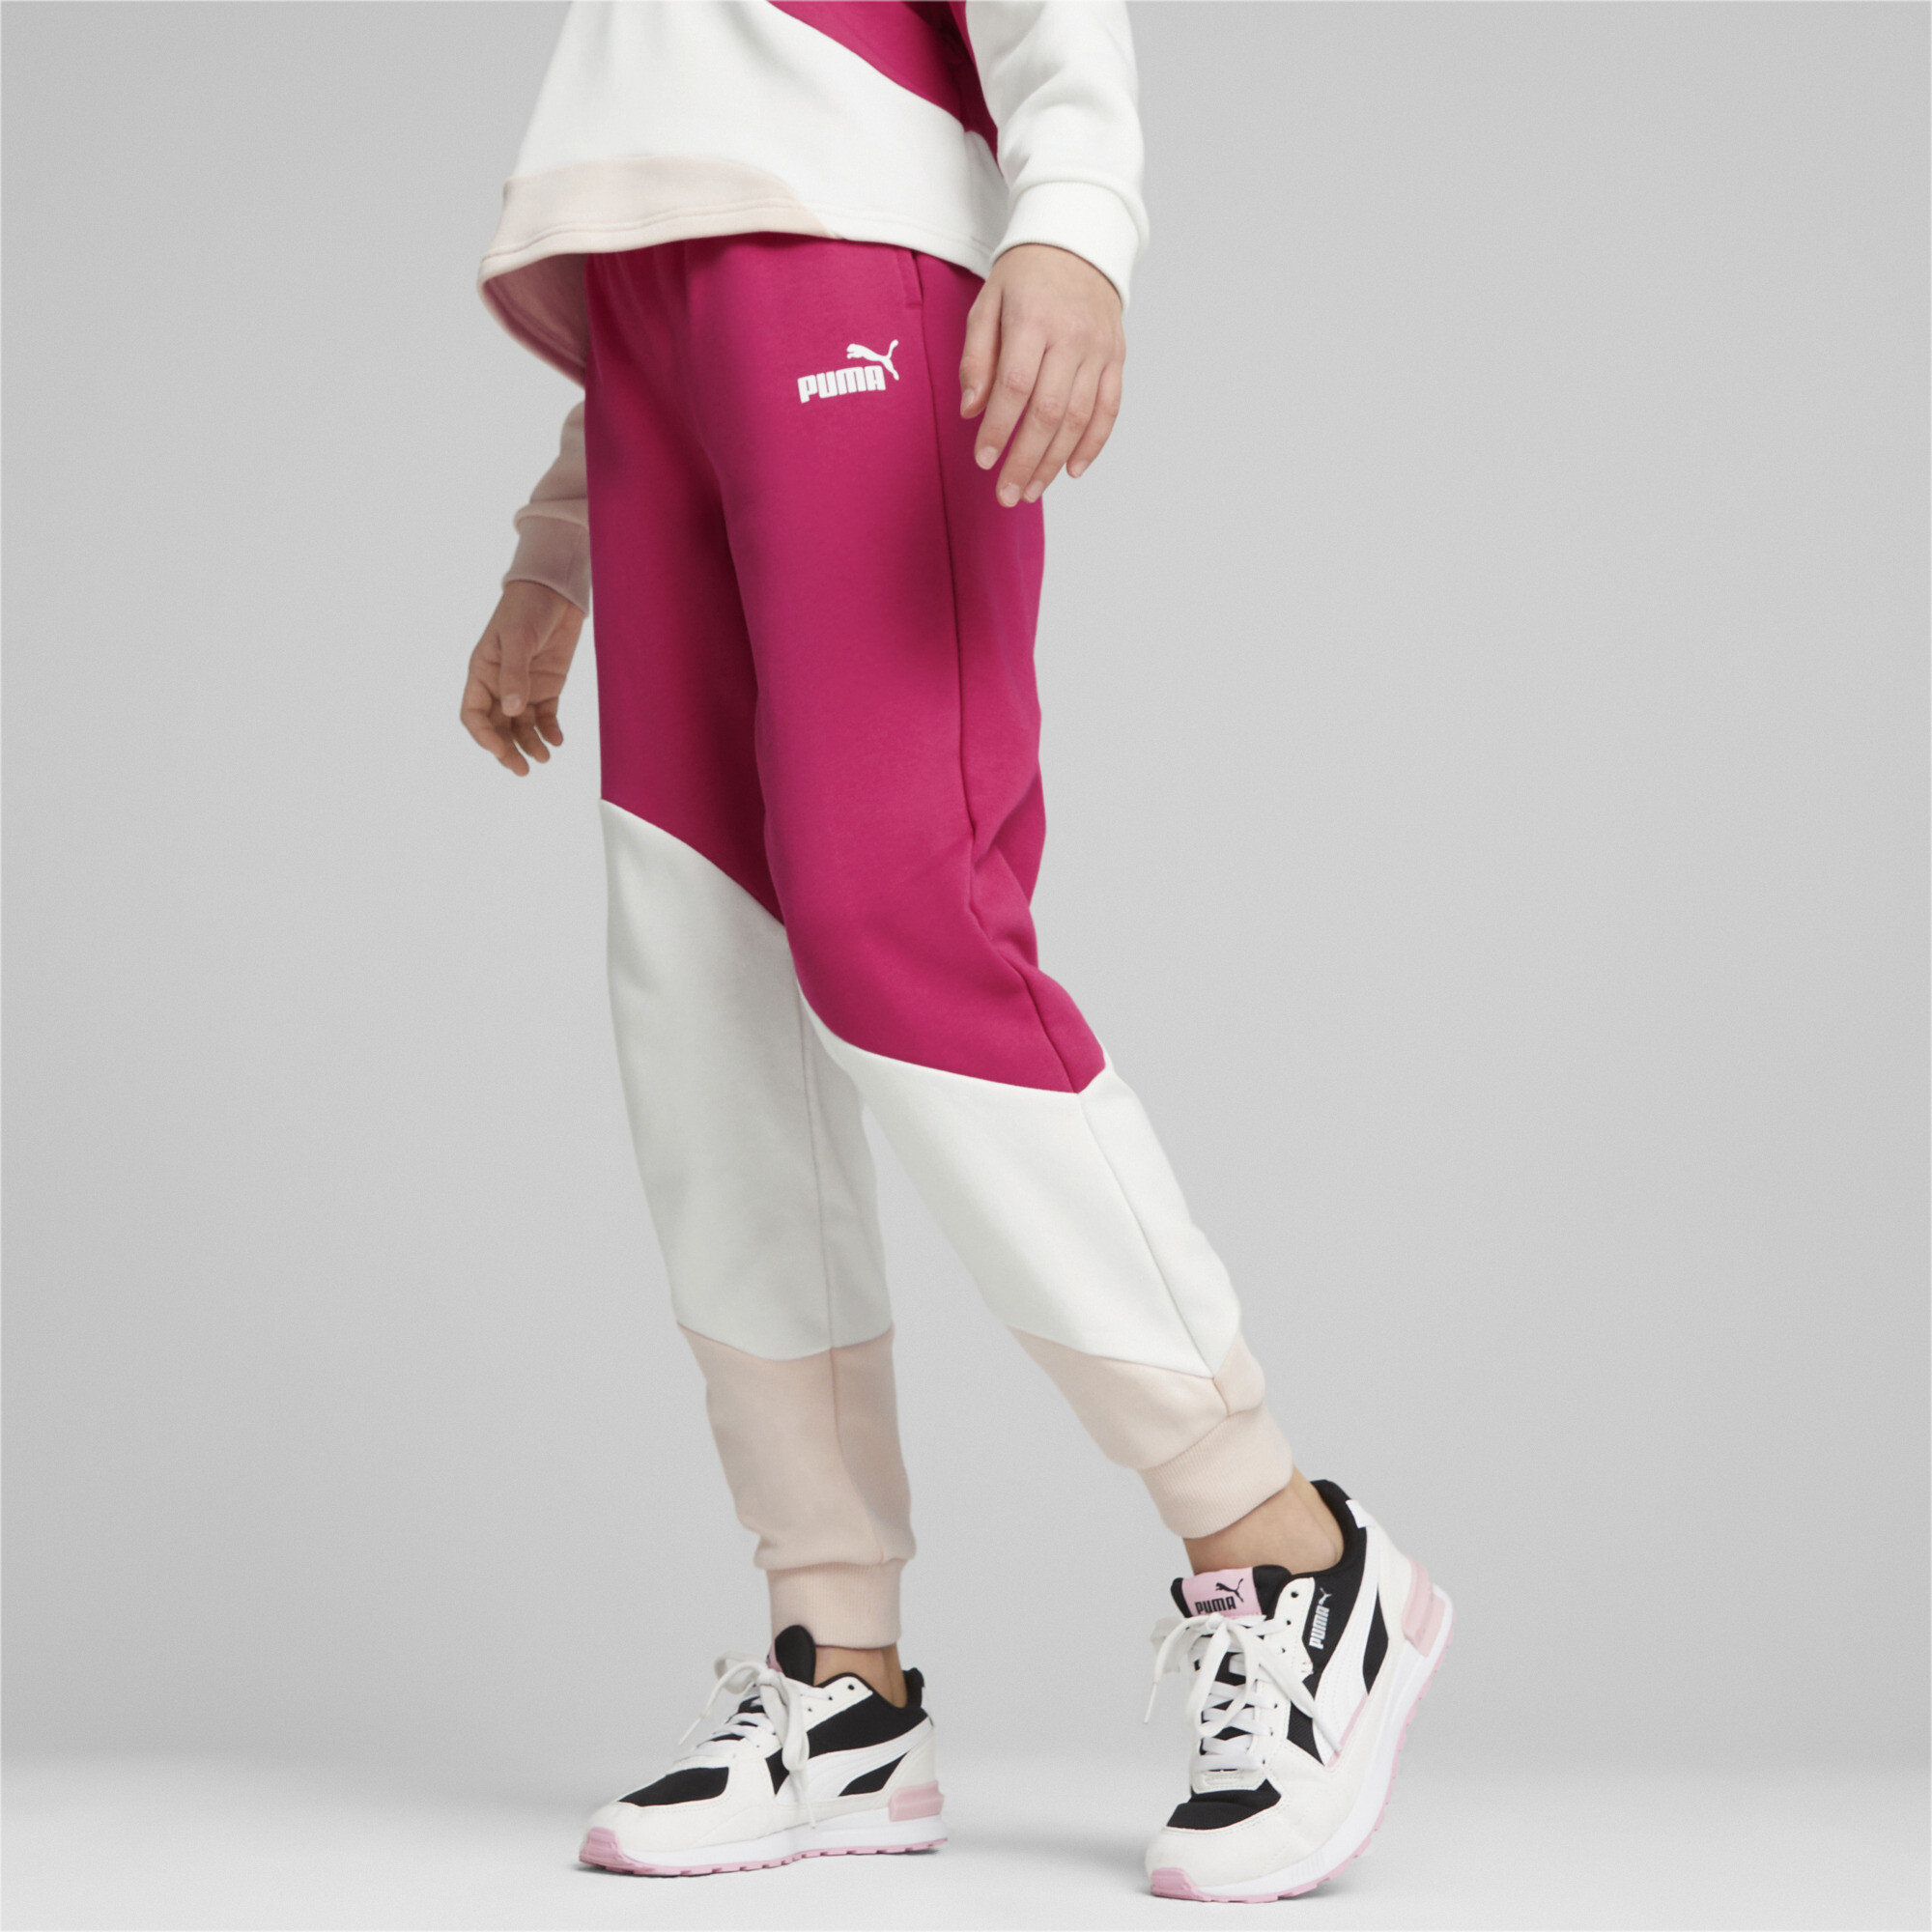 PUMA POWER Cat Pants In Pink, Size 13-14 Youth